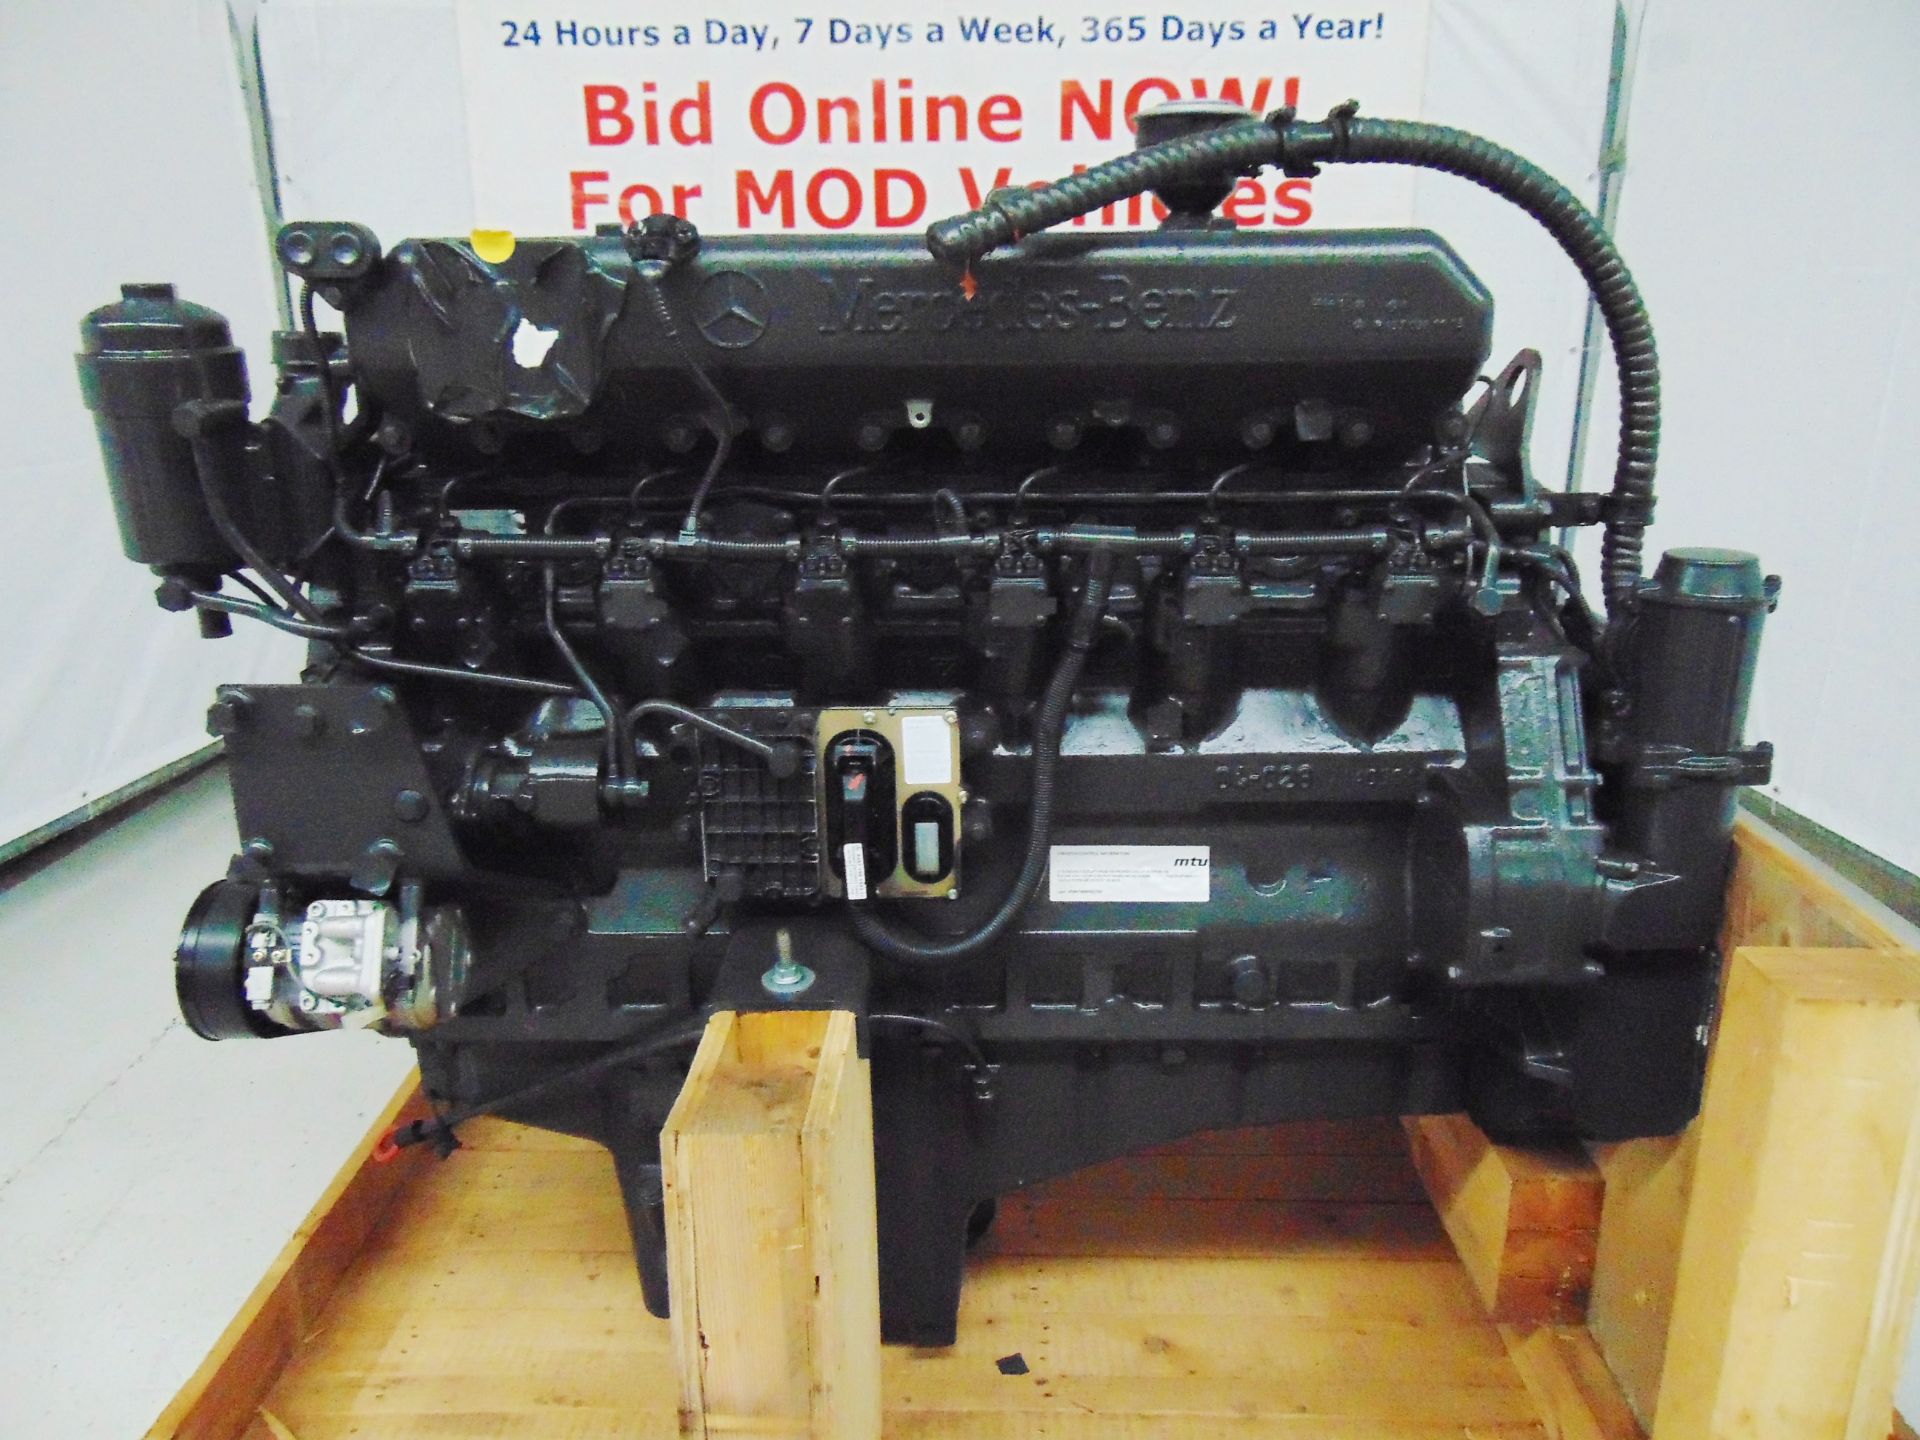 Factory Reconditioned Mercedes-Benz OM424 V12 Turbo Diesel Engine - Image 25 of 34